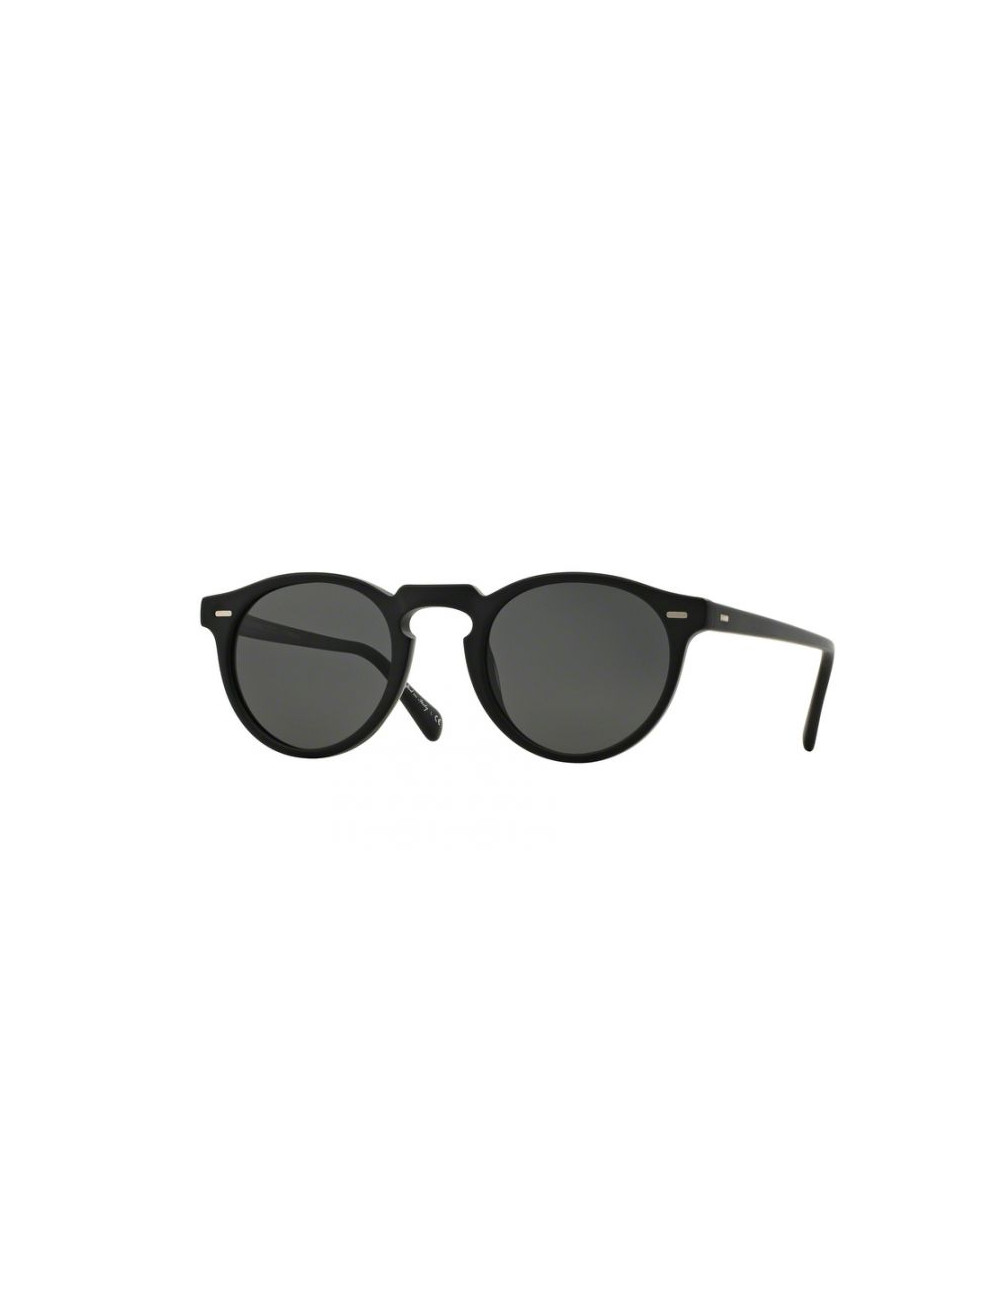 Oliver Peoples OV5217S Gregory Peck Sun 1031P2